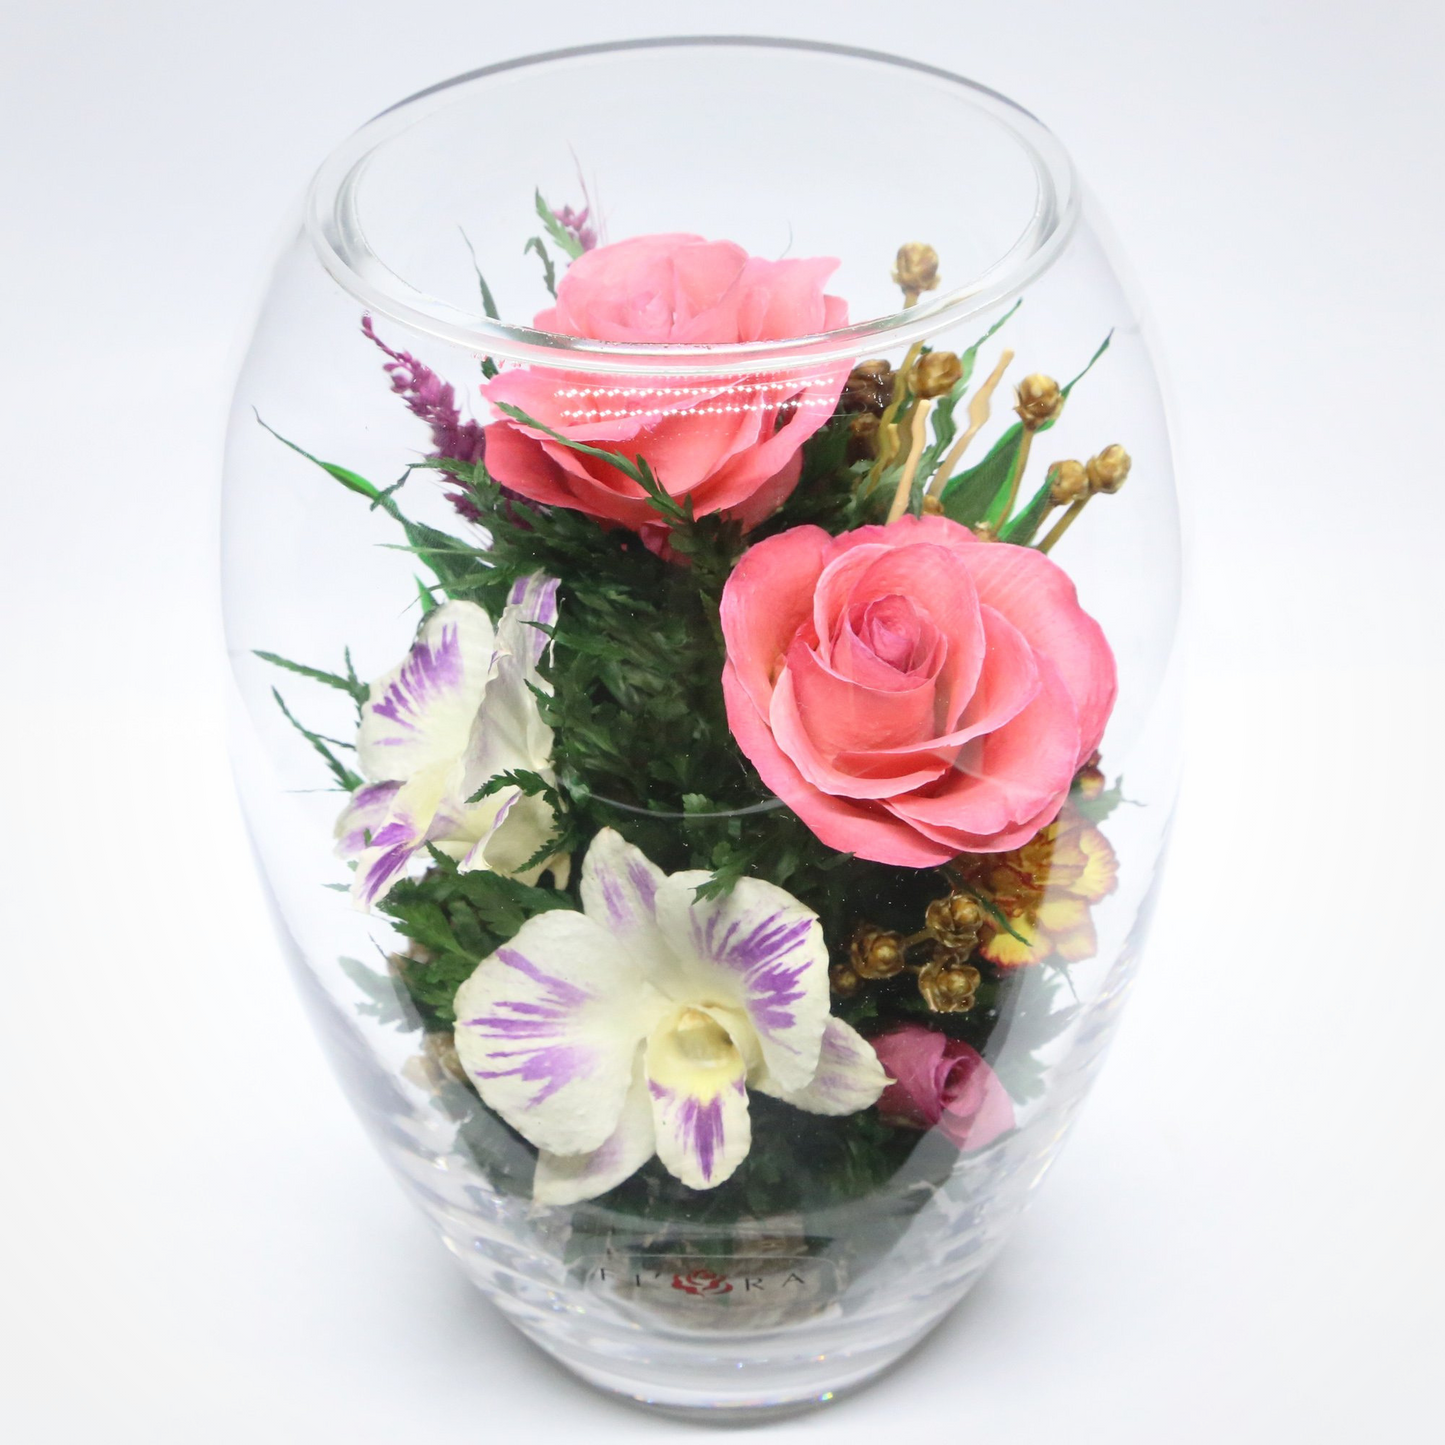 61097 Long-Lasting Pink Roses, Purple-Striped White & King Dragon Orchids, Orange Spray Carnations in an Elliptical Glass Vase